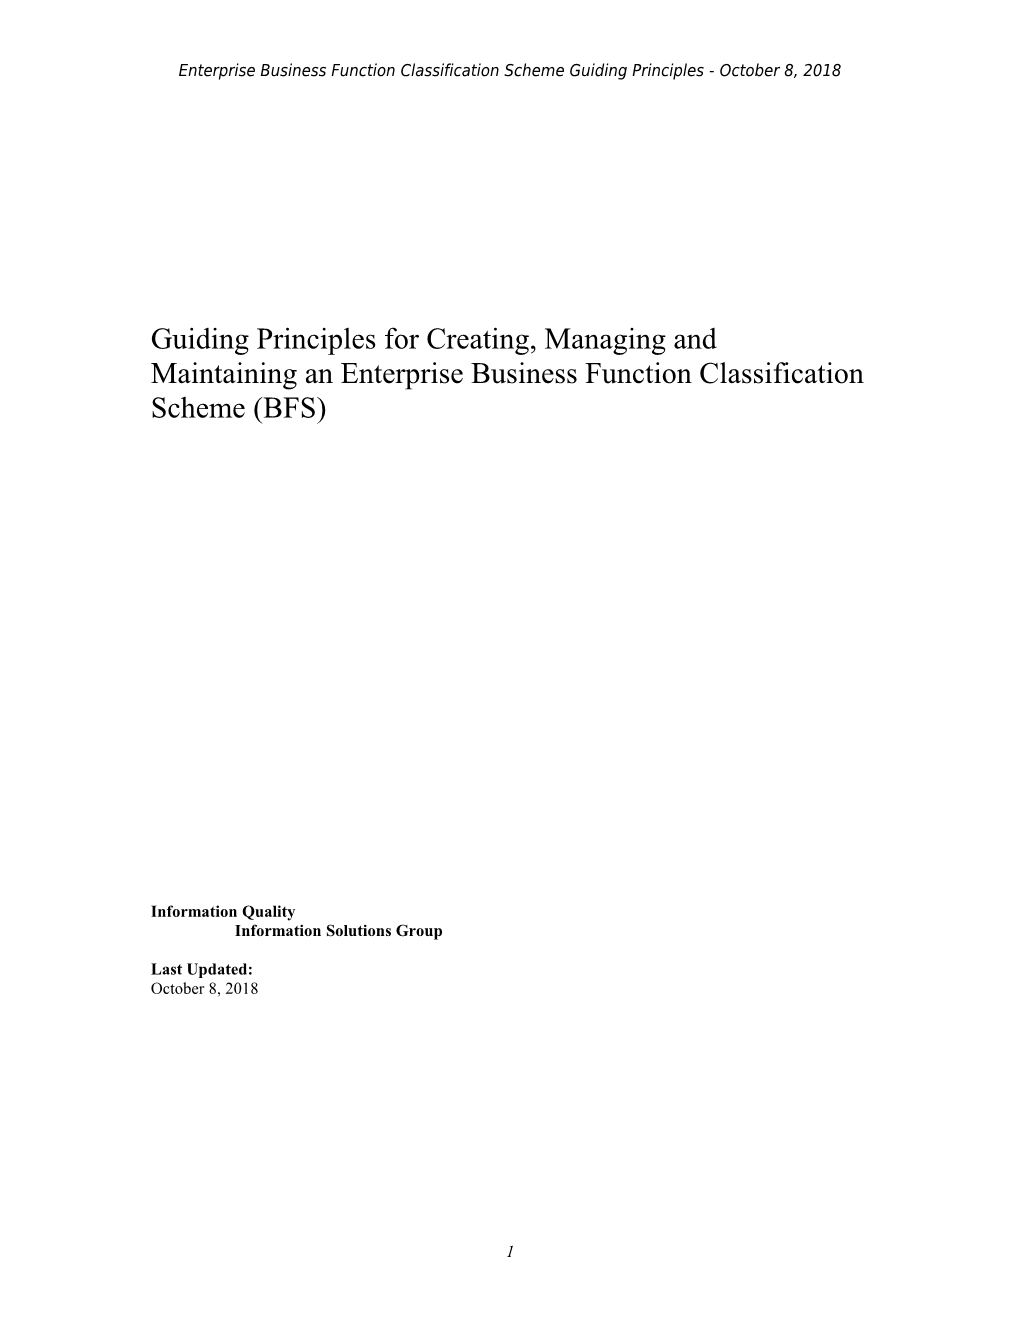 Guiding Principles and Best Practices for Creating, Managing and Maintaining an Enterprise